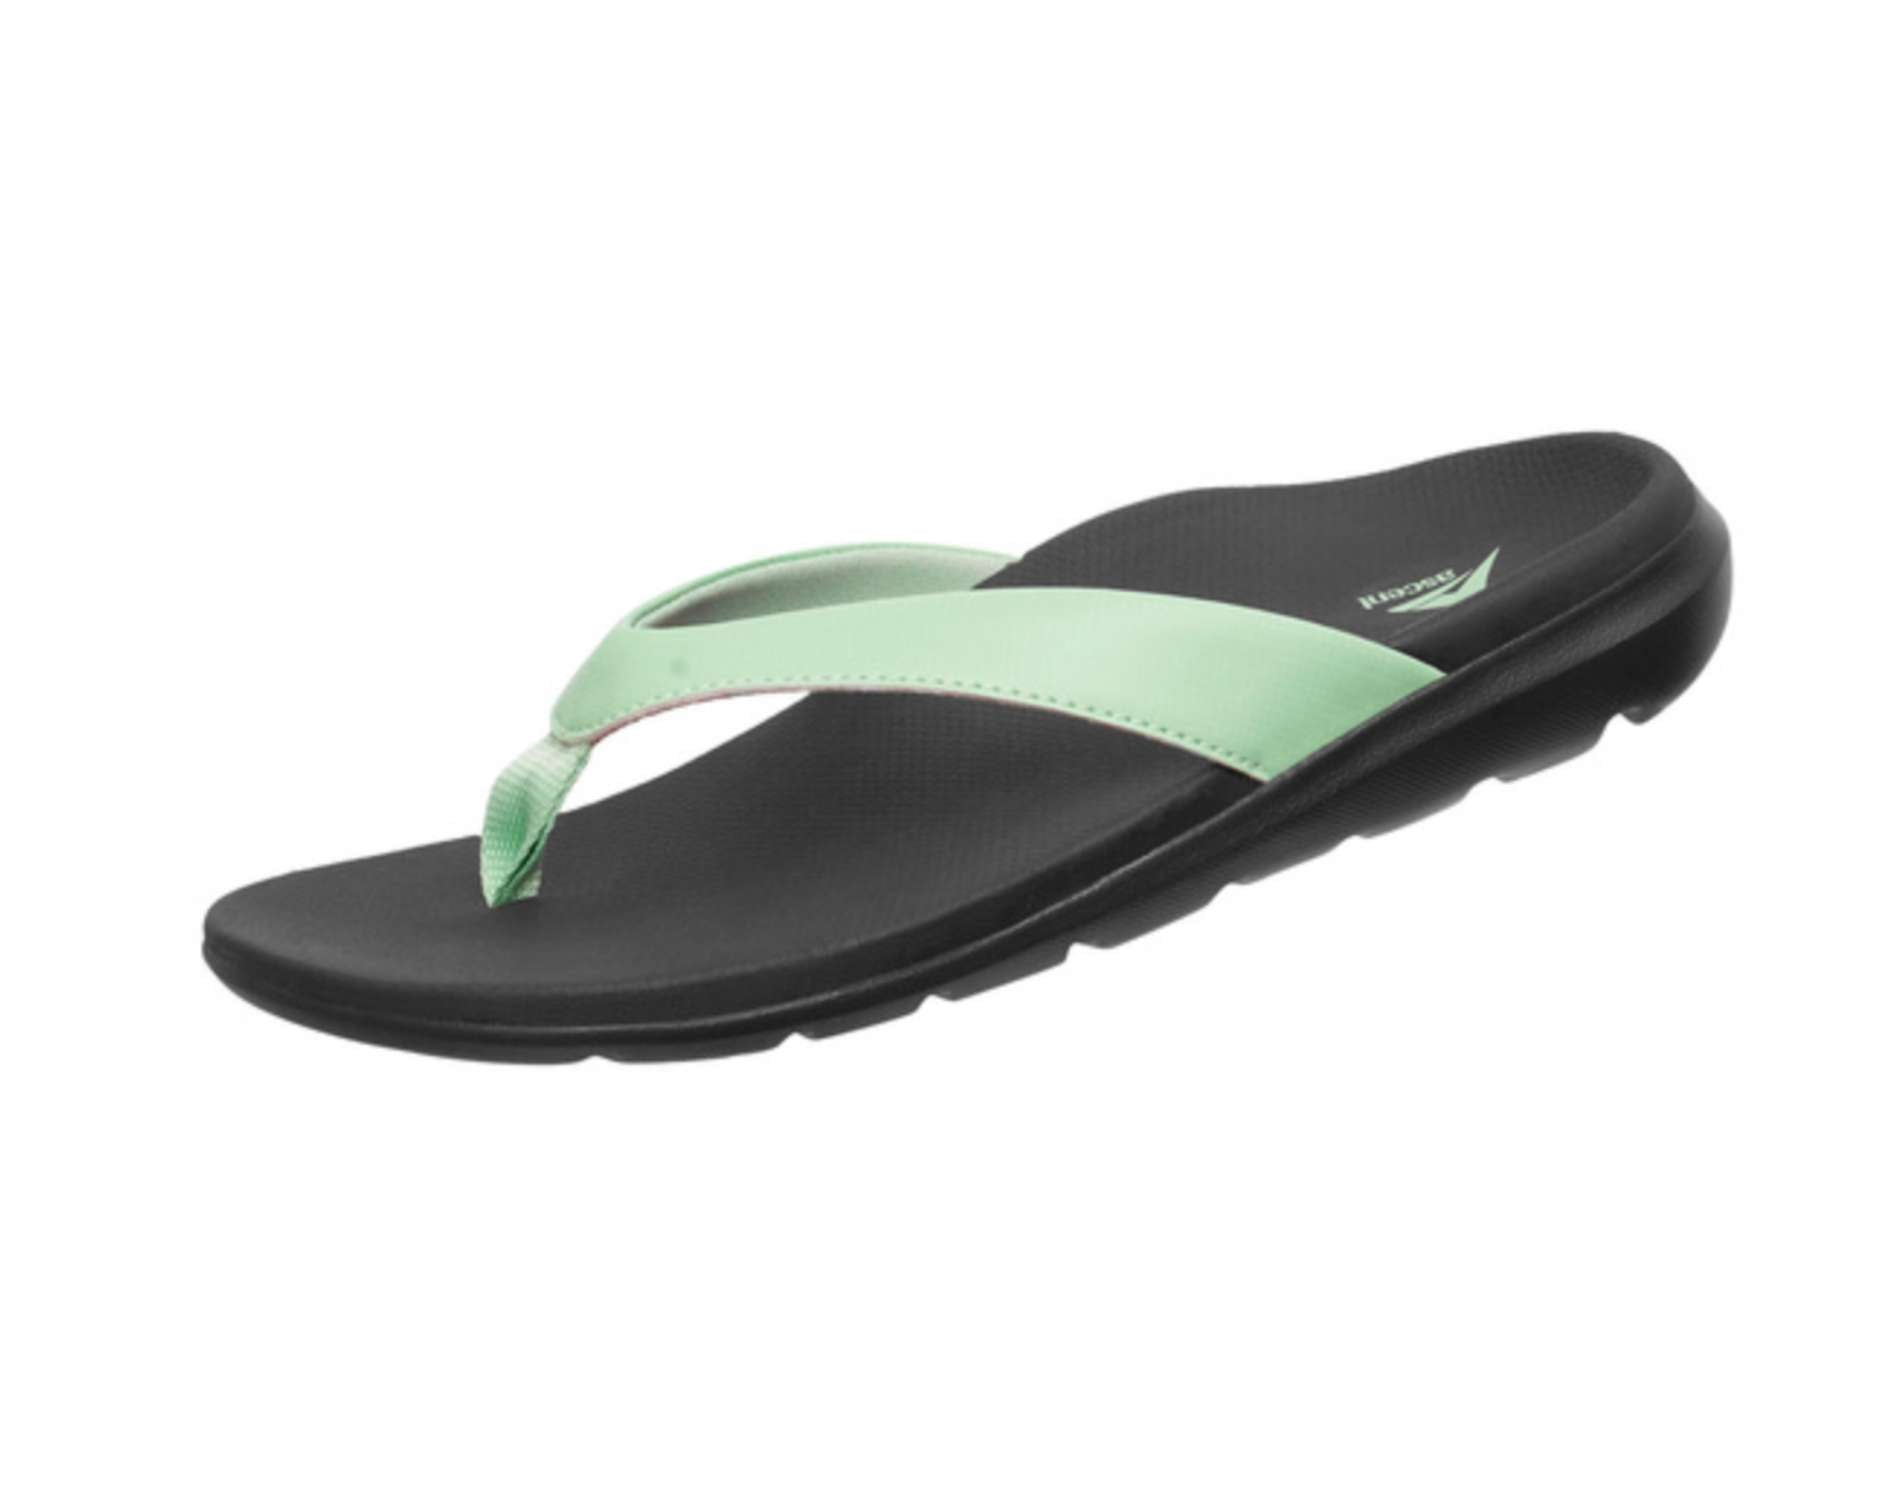 Ascent's Groove sandals for women in sage colour